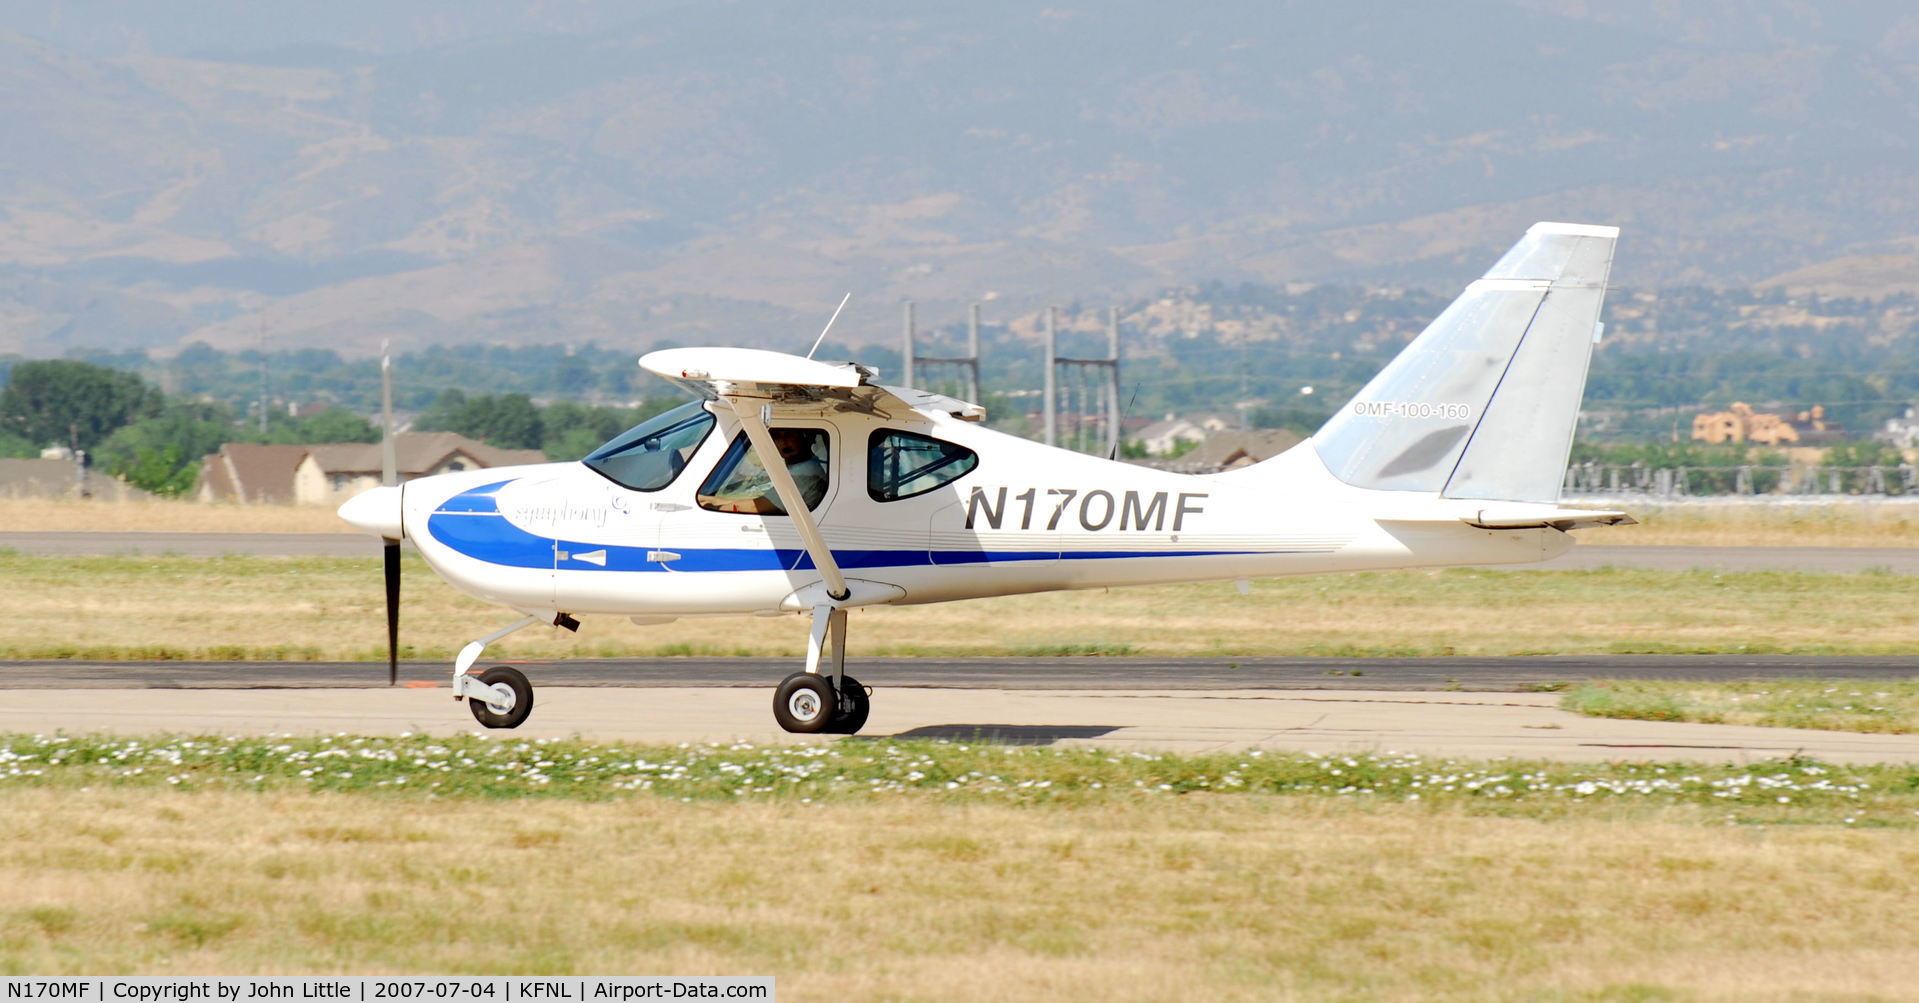 N170MF, 2001 OMF 100-160 Symphony C/N 0017, Taxi Ft Collins/Loveland Airport